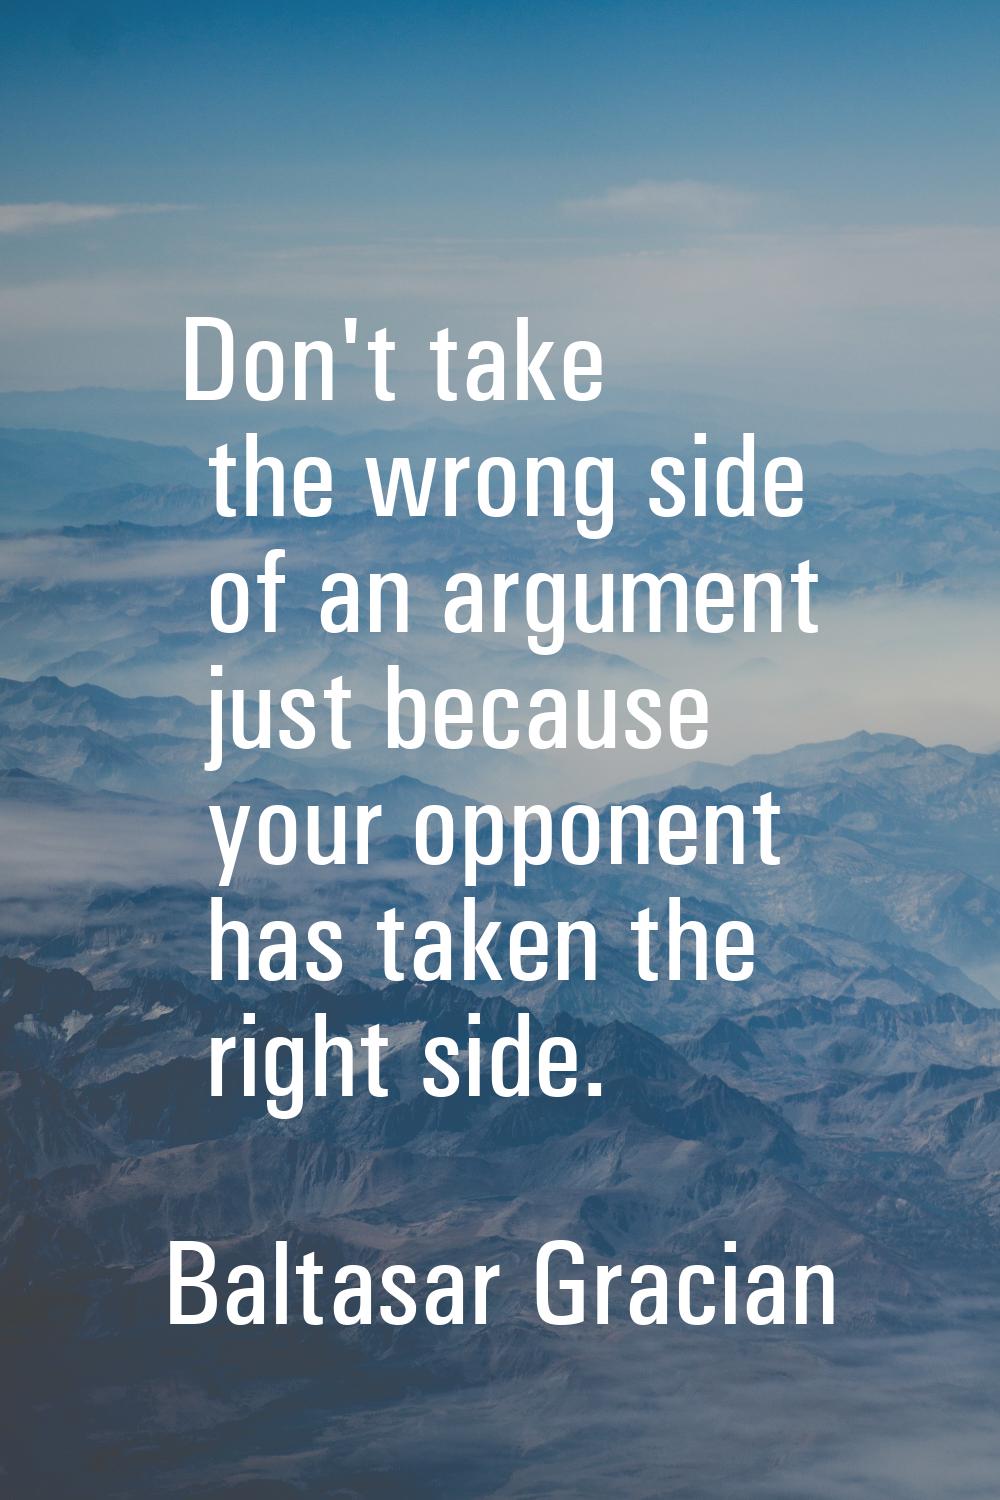 Don't take the wrong side of an argument just because your opponent has taken the right side.